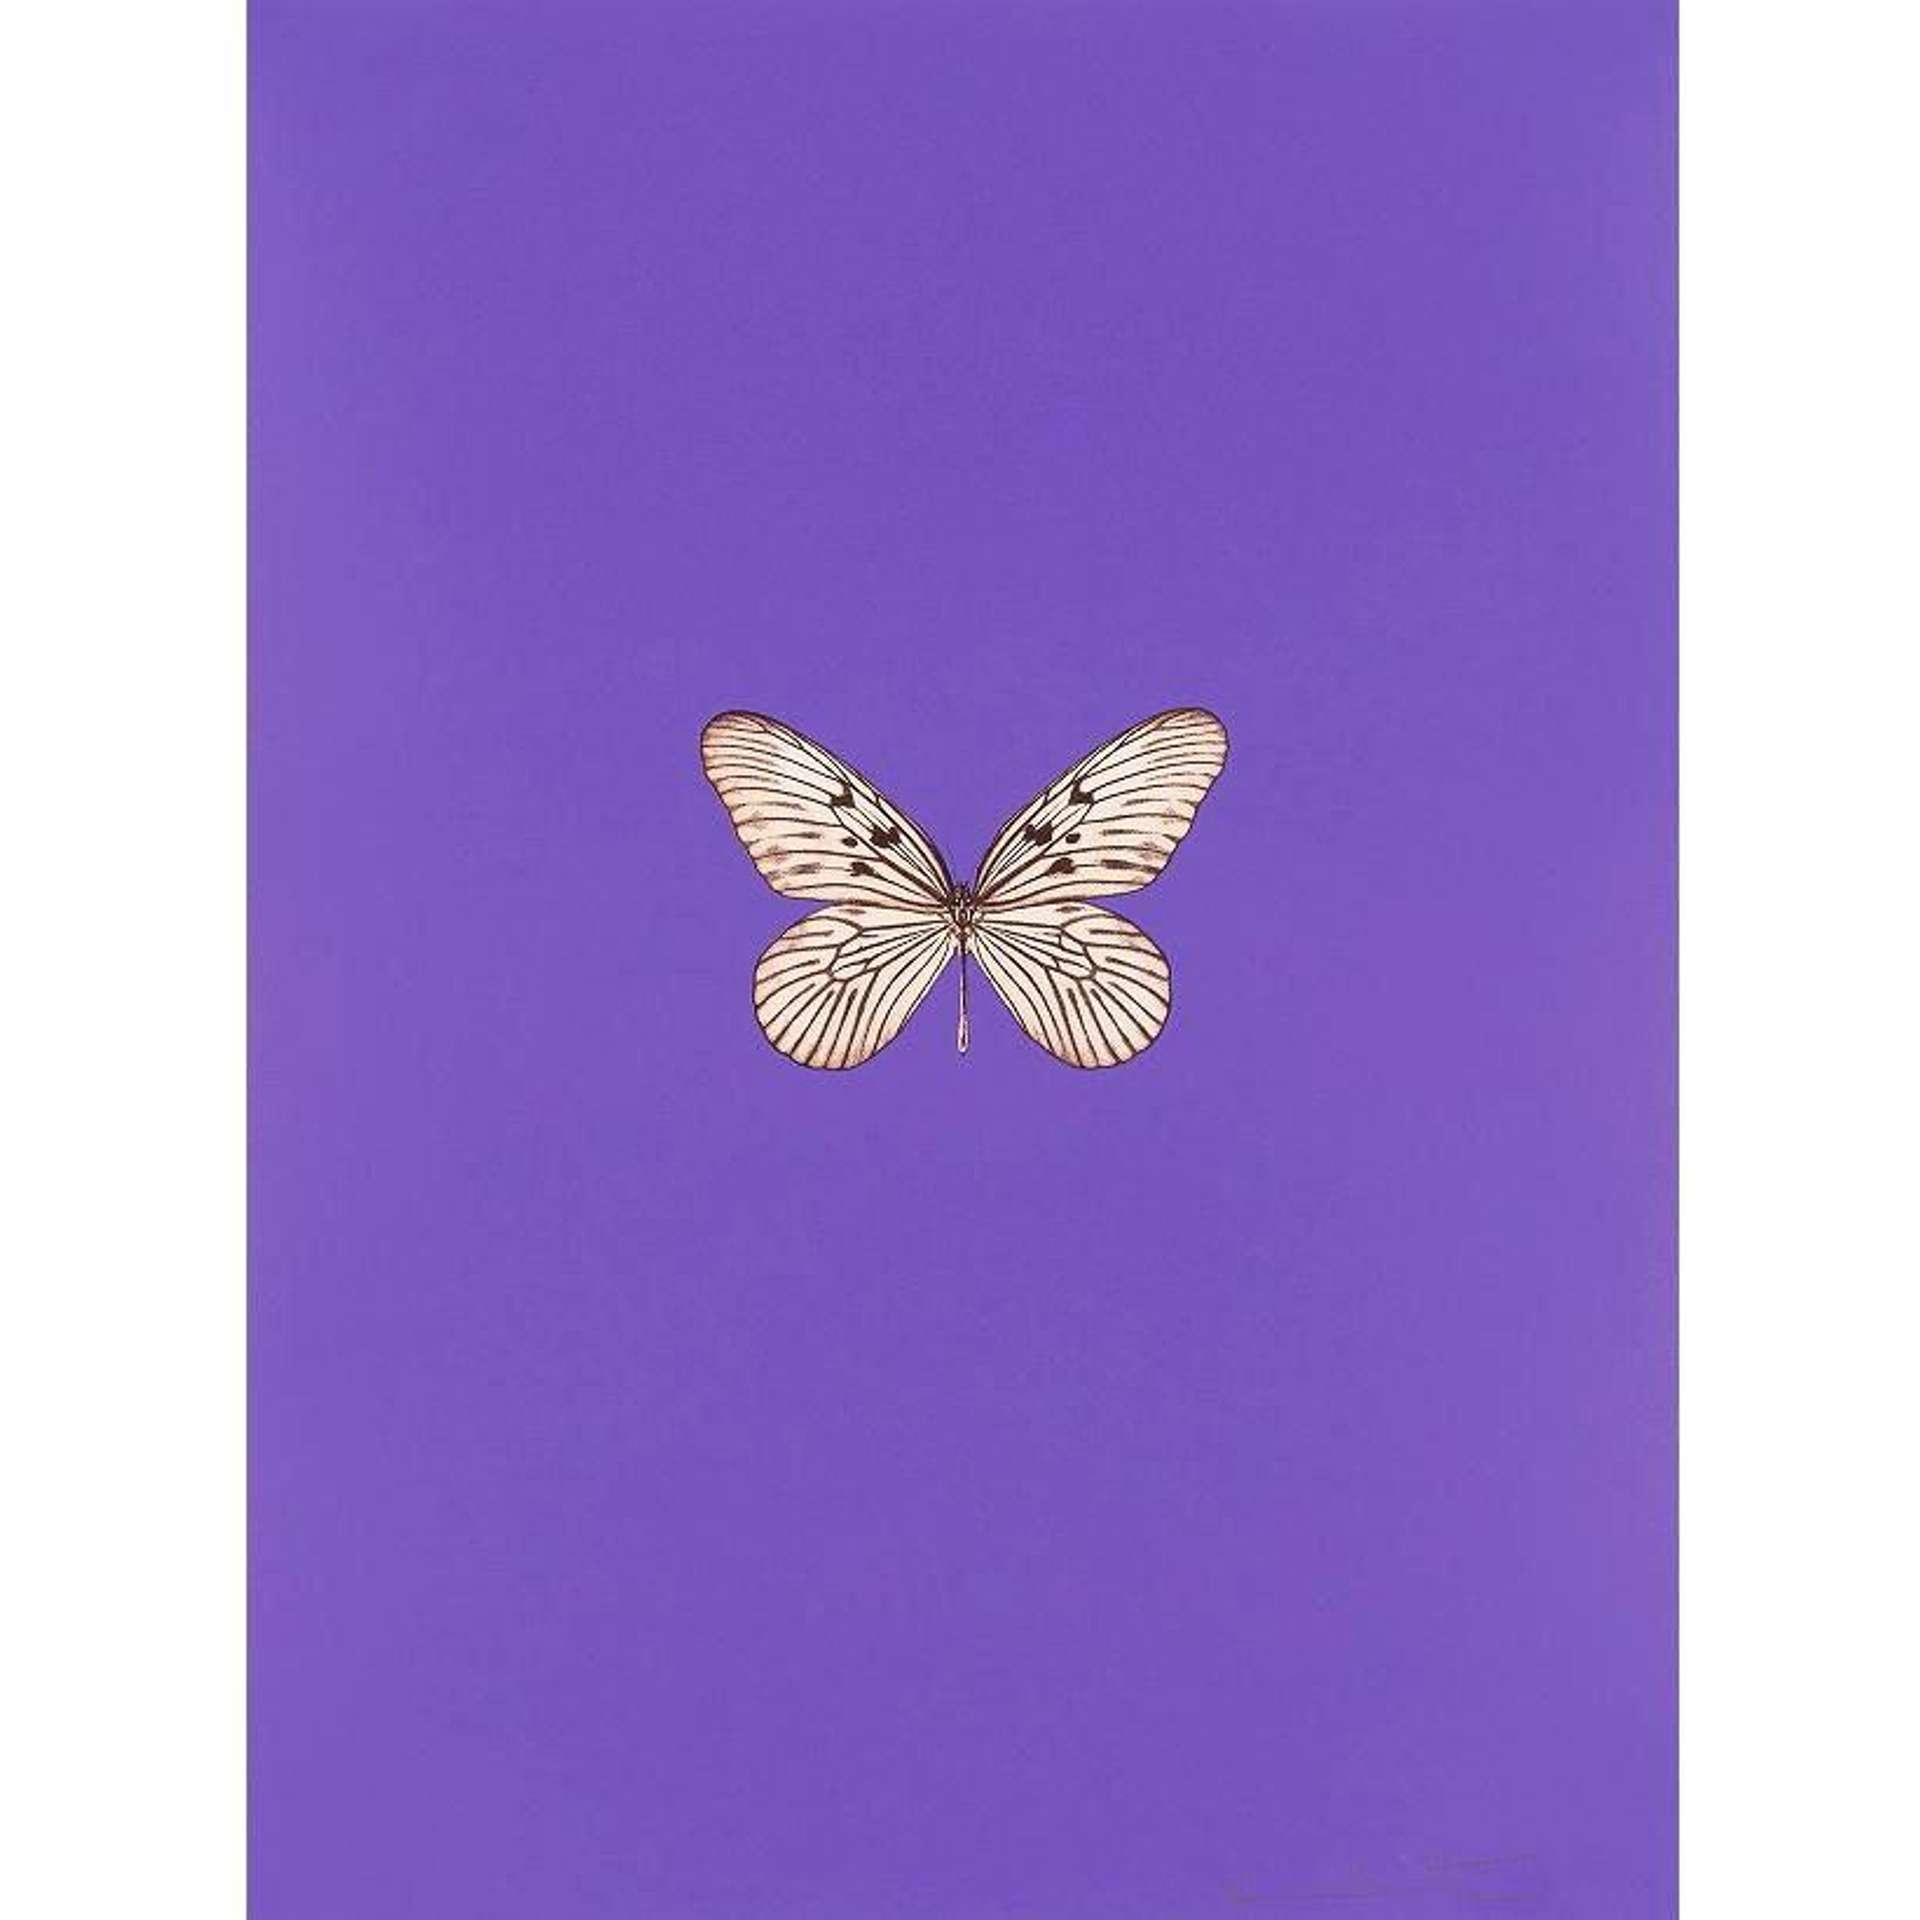 It’s A Beautiful Day 1 - Signed Print by Damien Hirst 2013 - MyArtBroker